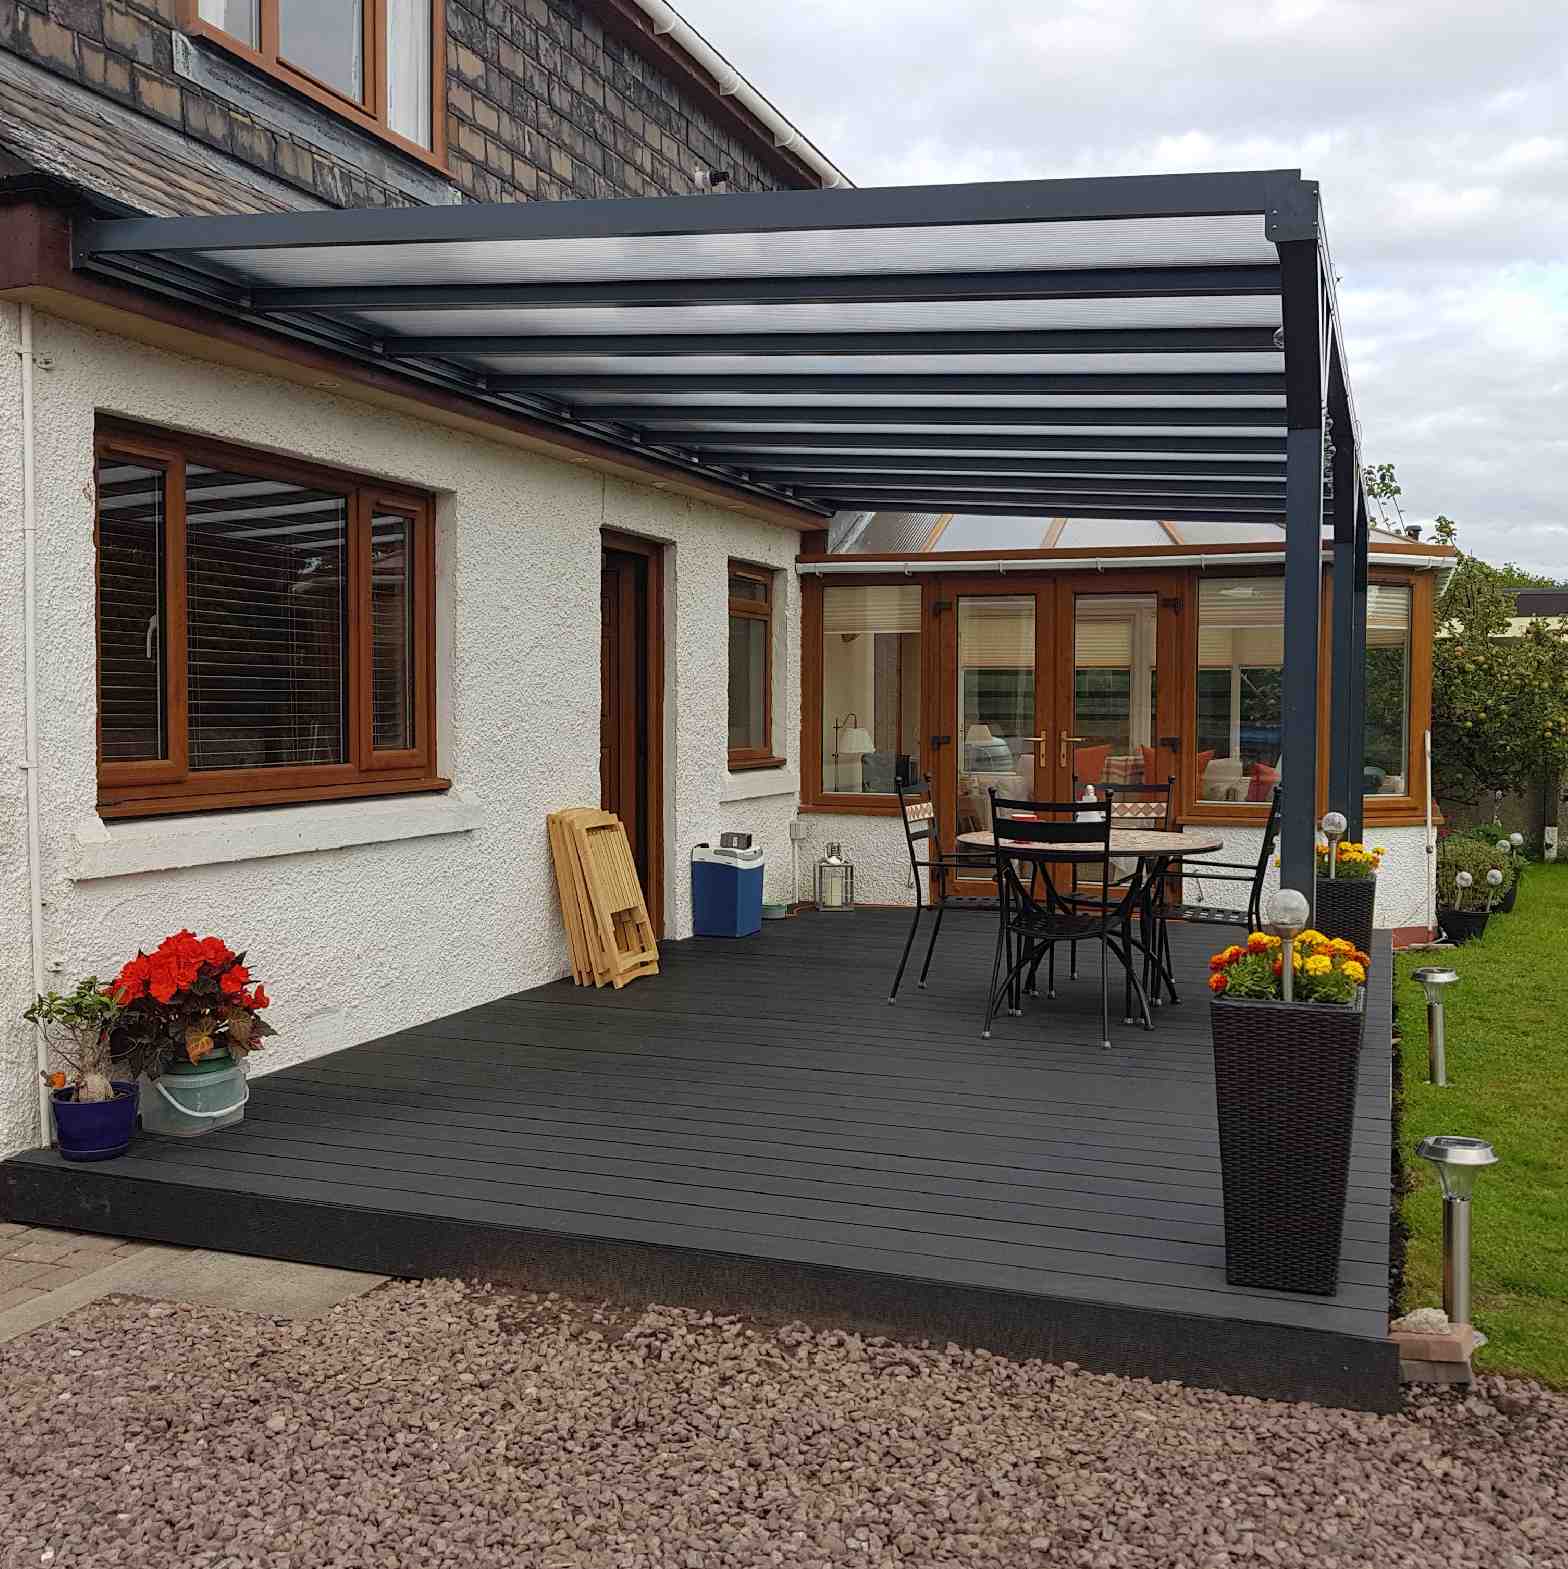 Buy Omega Verandah, Anthracite Grey, 16mm Polycarbonate Glazing - 2.1m (W) x 2.5m (P), (2) Supporting Posts online today